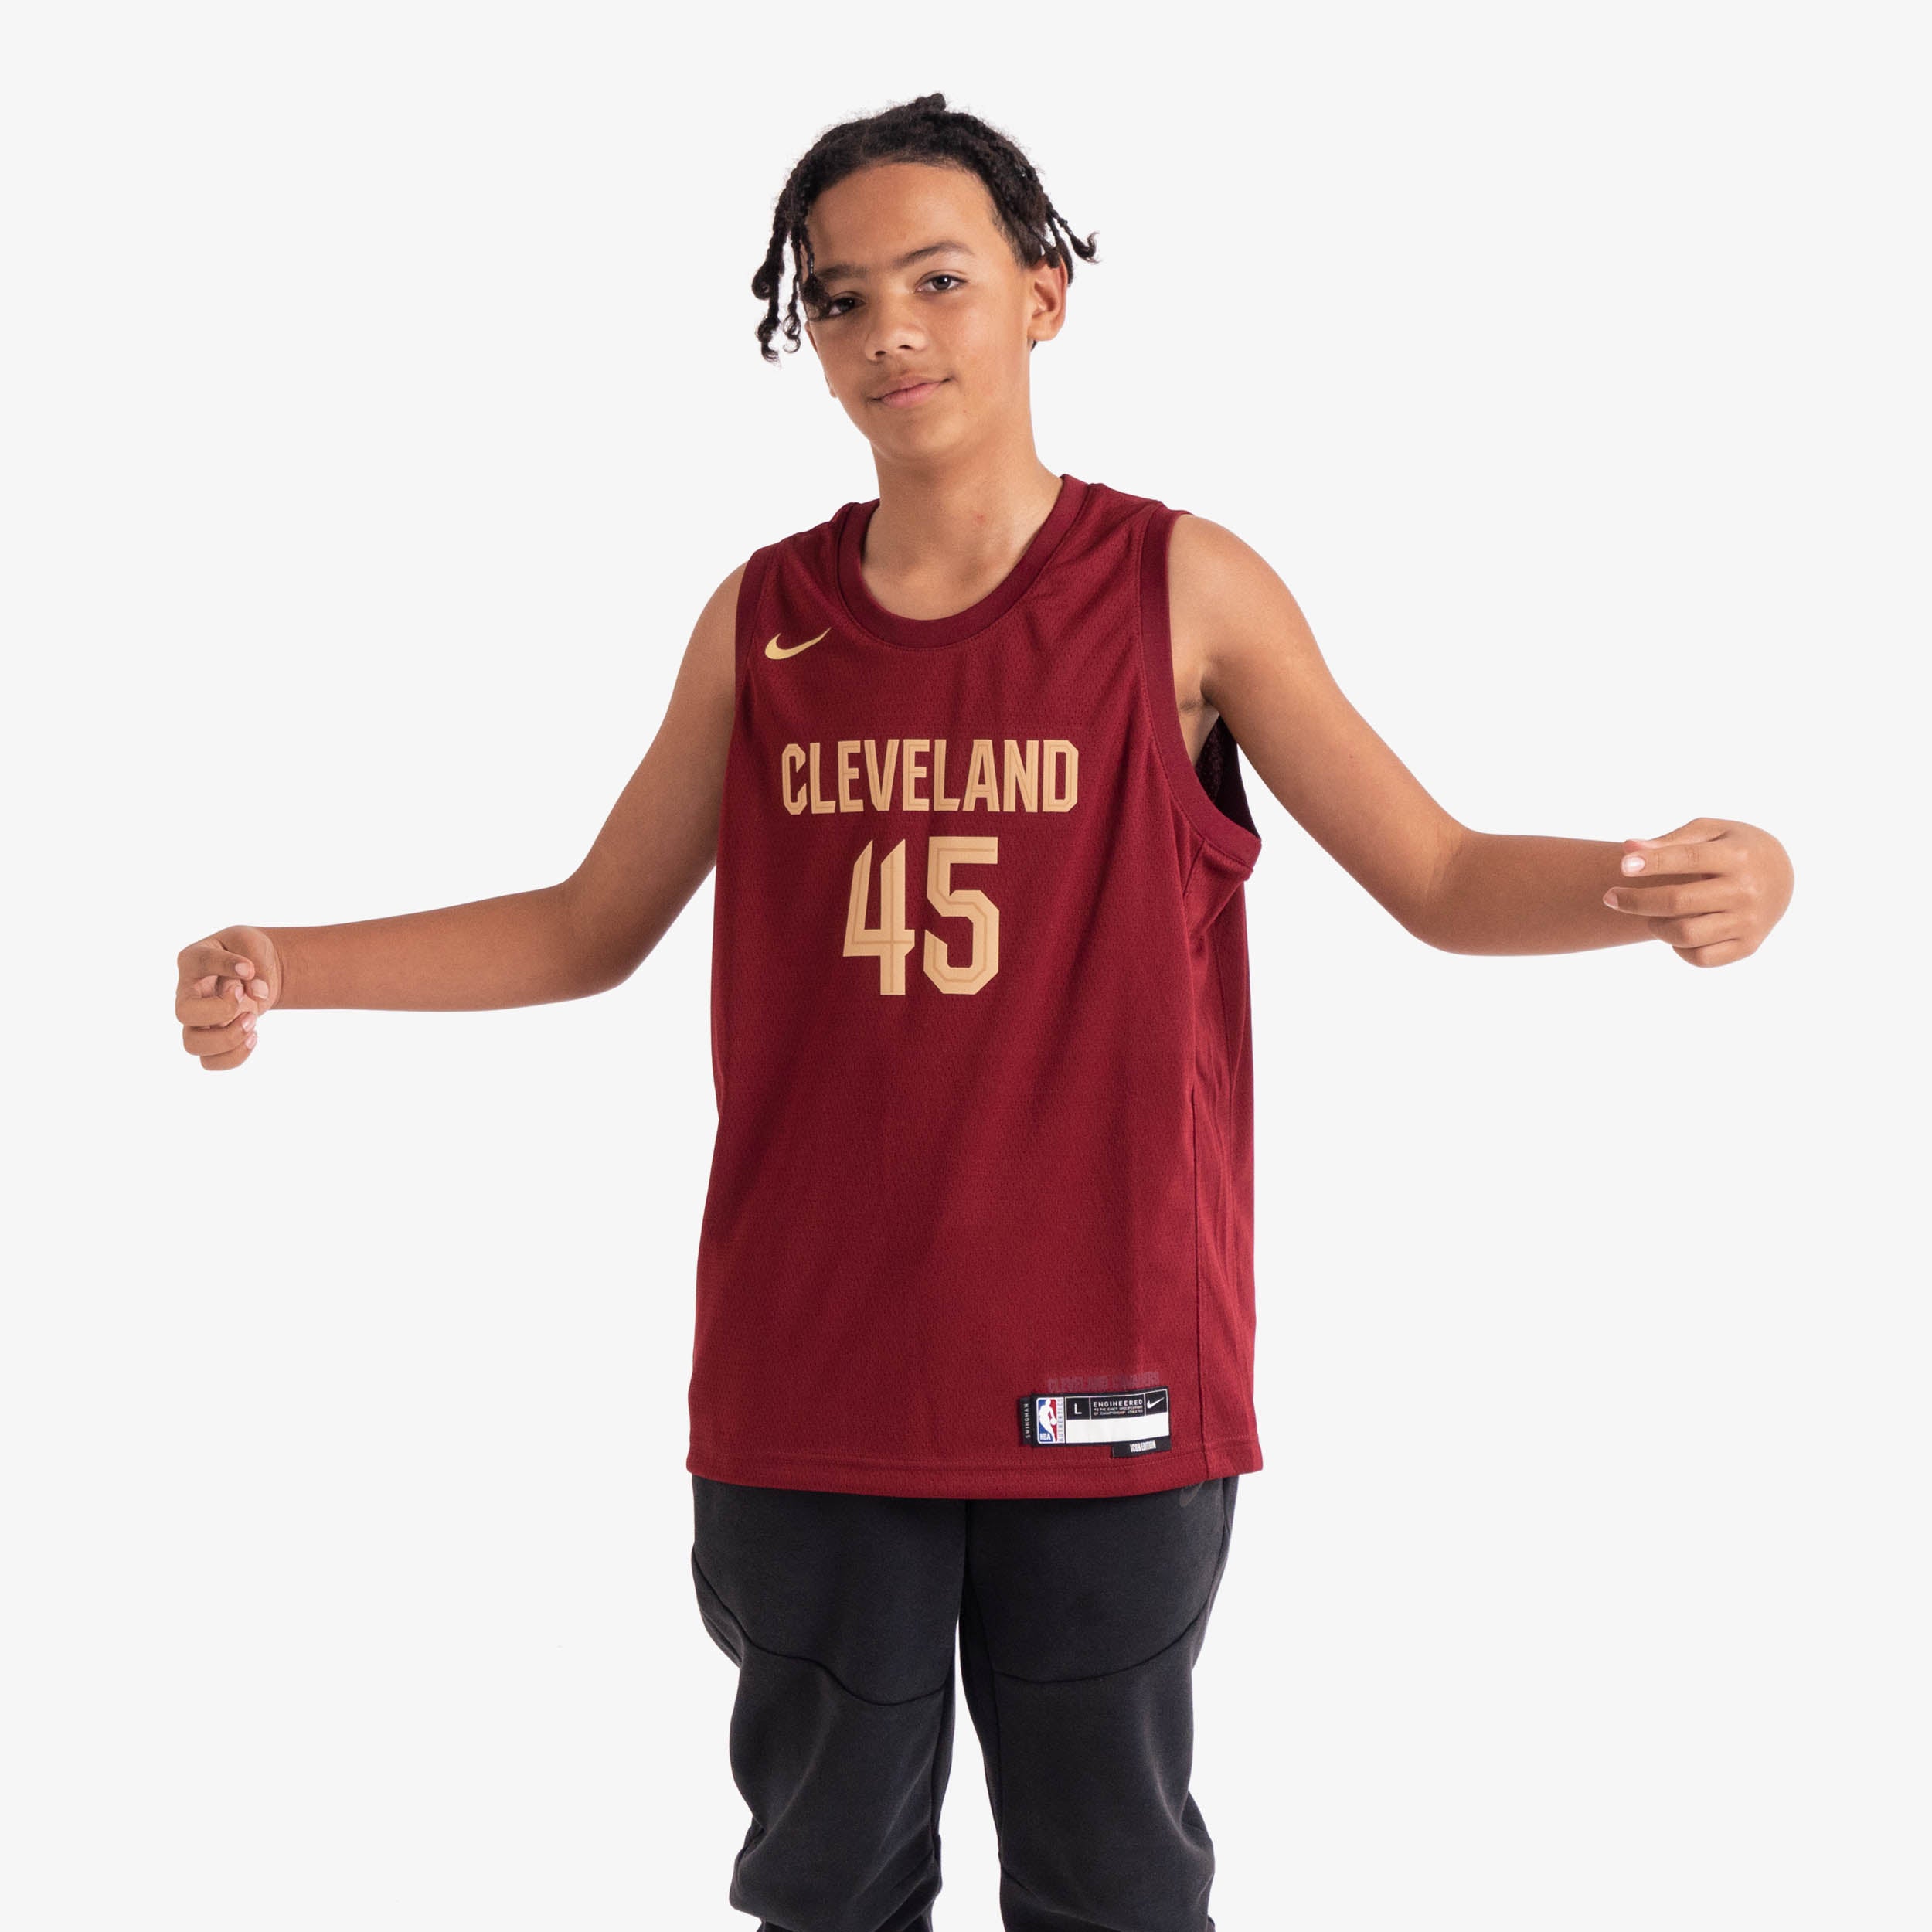 Nike Kids' Cleveland Cavaliers Donovan Mitchell #45 Icon Jersey